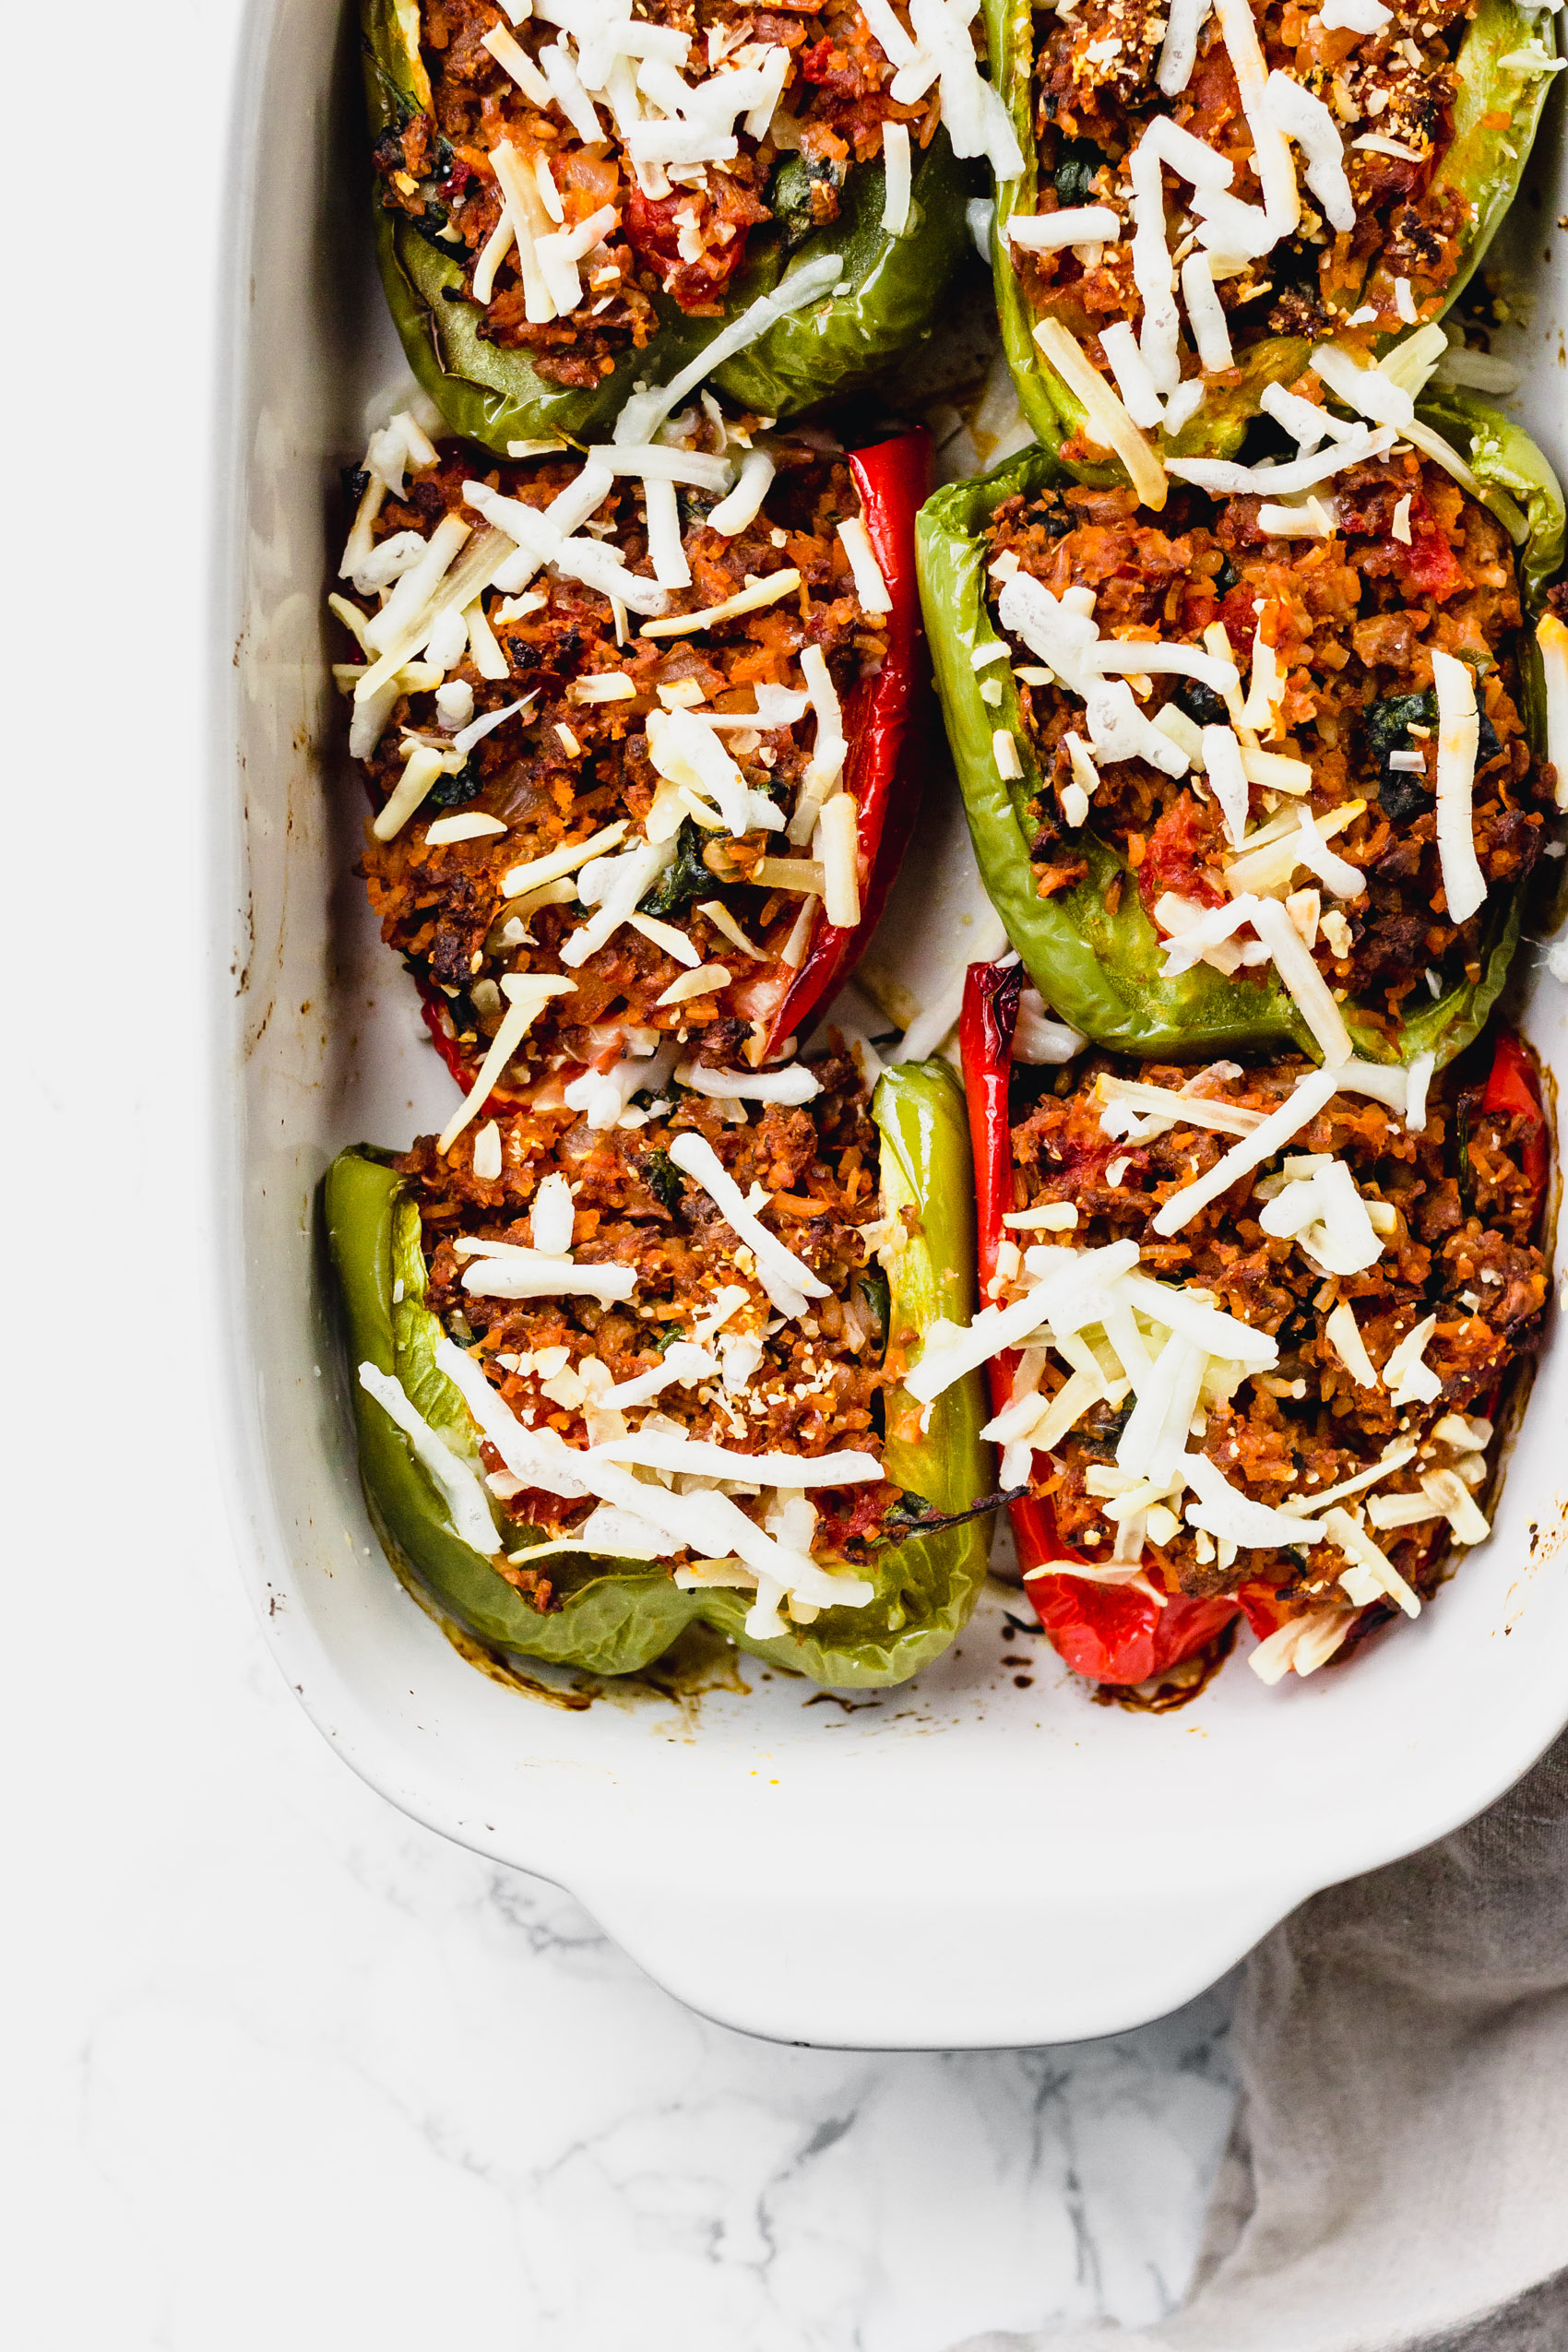 a casserole dish of baked bell peppers stuffed with vegan meat and cheese